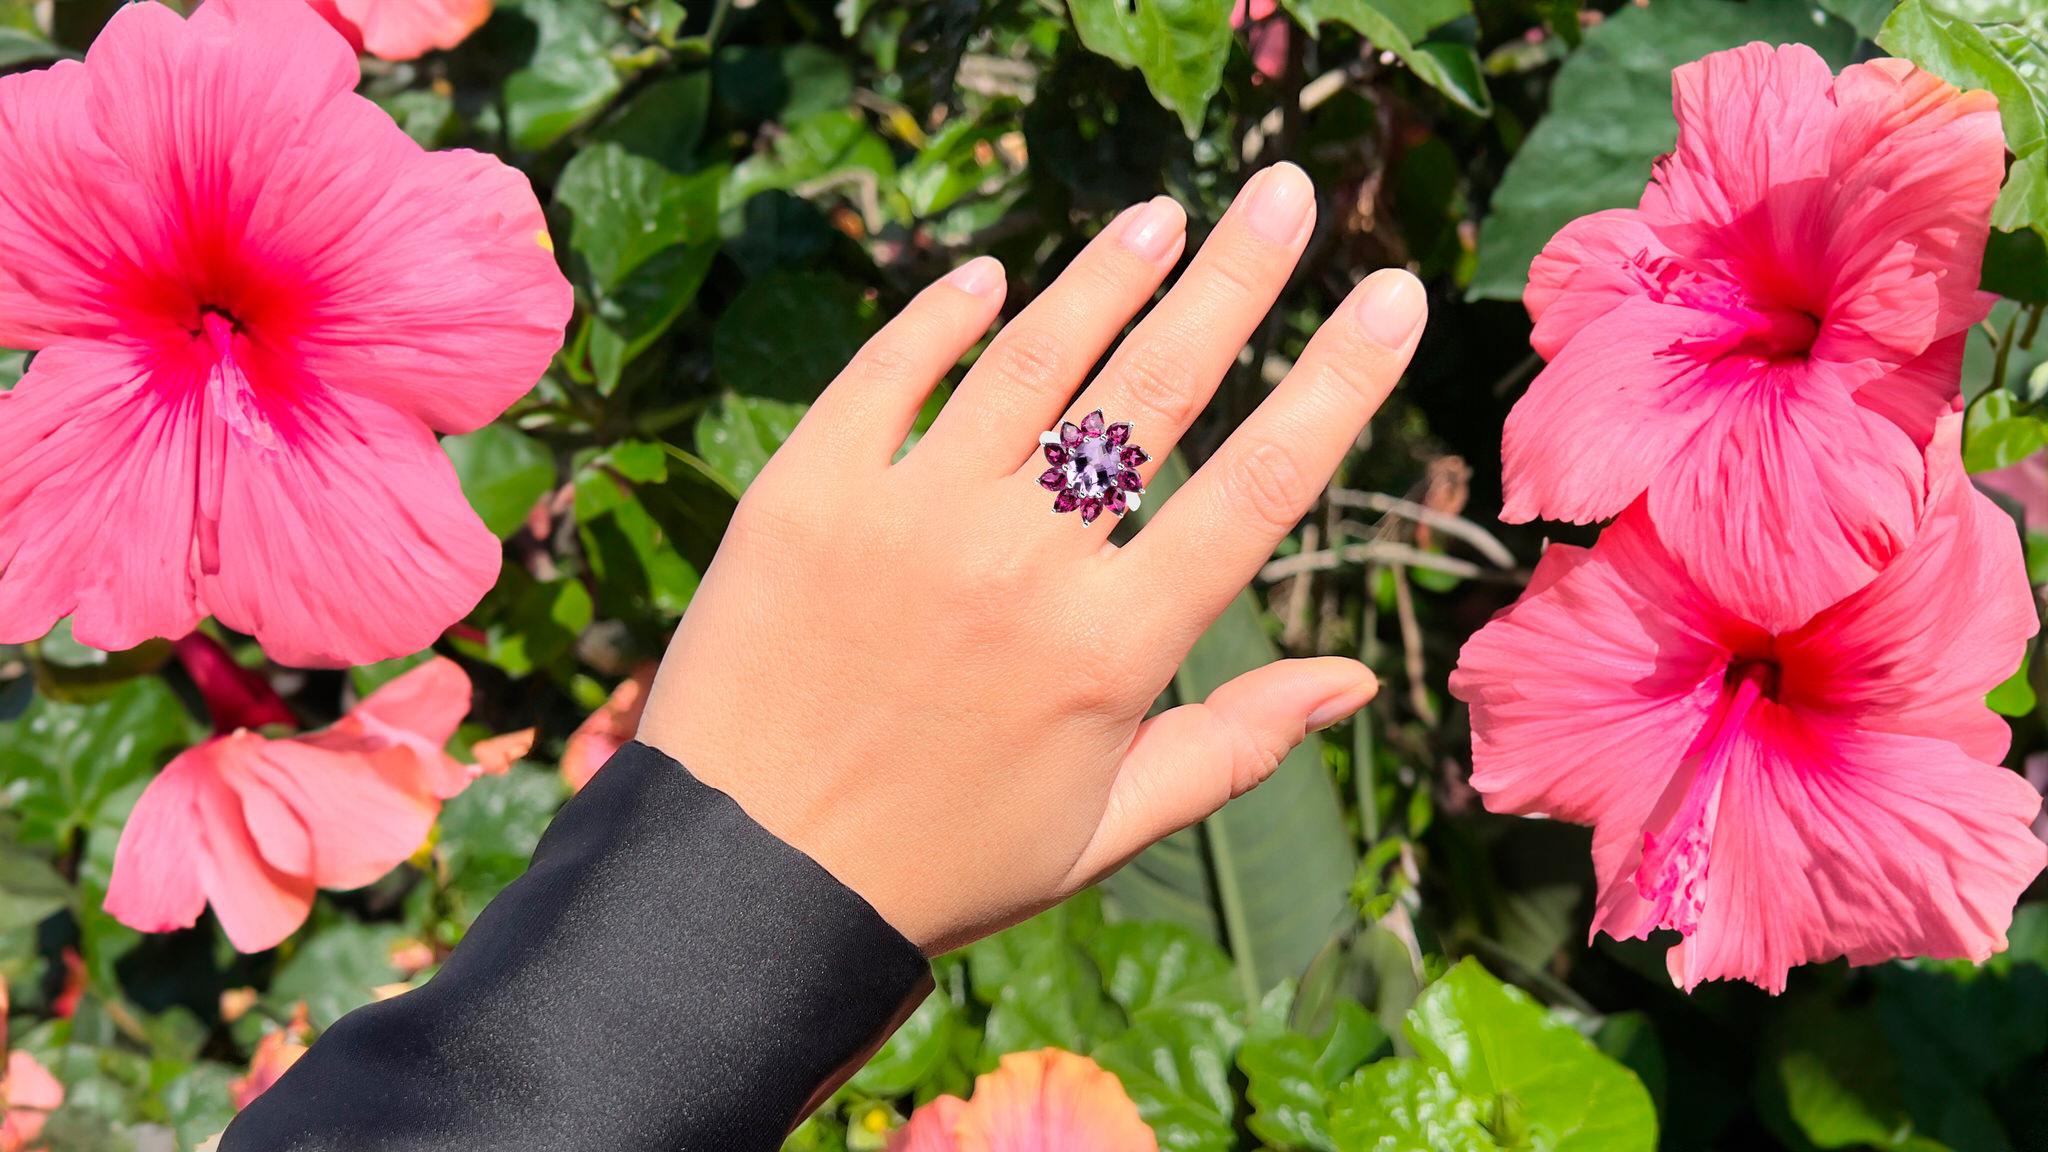 It comes with the Gemological Appraisal by GIA GG/AJP
All Gemstones are Natural
Amethyst = 2.18 Carat
10 Rhodolites = 3.50 Carats
Metal: Rhodium Plated Sterling Silver
Ring Size: 9* US
*It can be resized complimentary